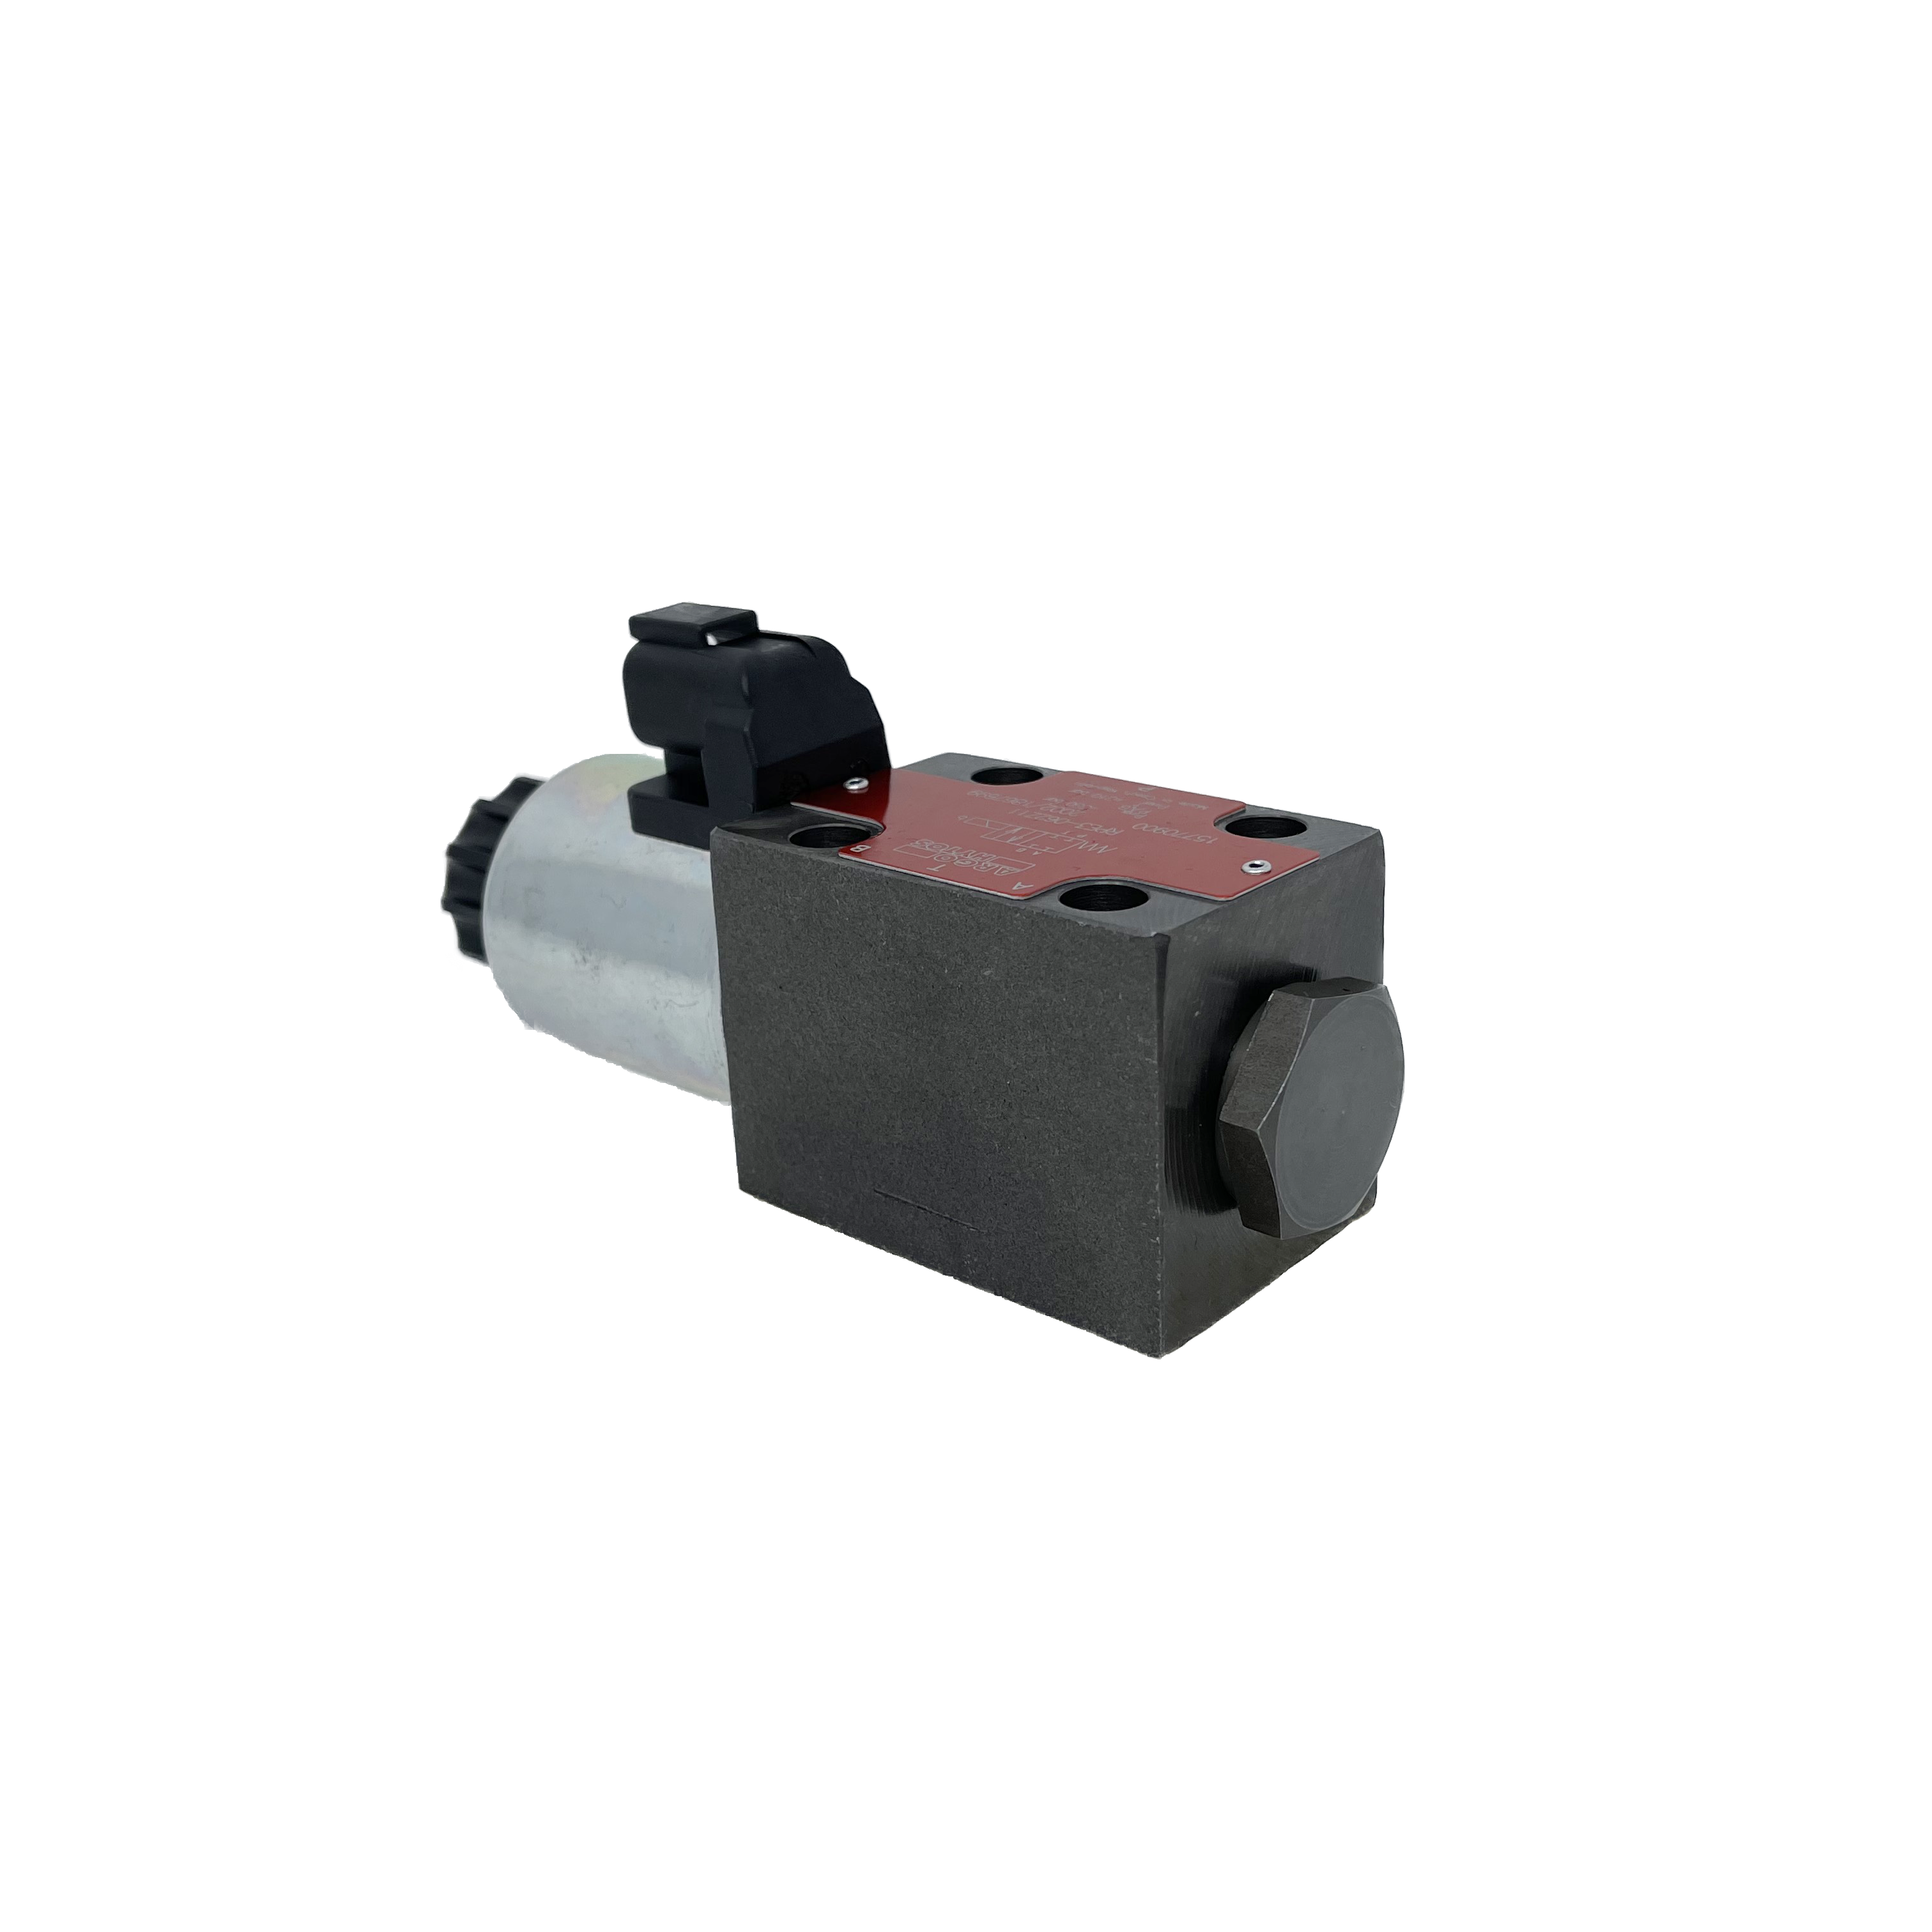 RPE3-062Y51/02400E12A : Argo Hytos Directional Control Valve, D03 (NG6), 21GPM, 5100psi, 2P4W, 24 VDC, Deutsch, Spring Return, Motor Spool in Neutral, Coil Side A